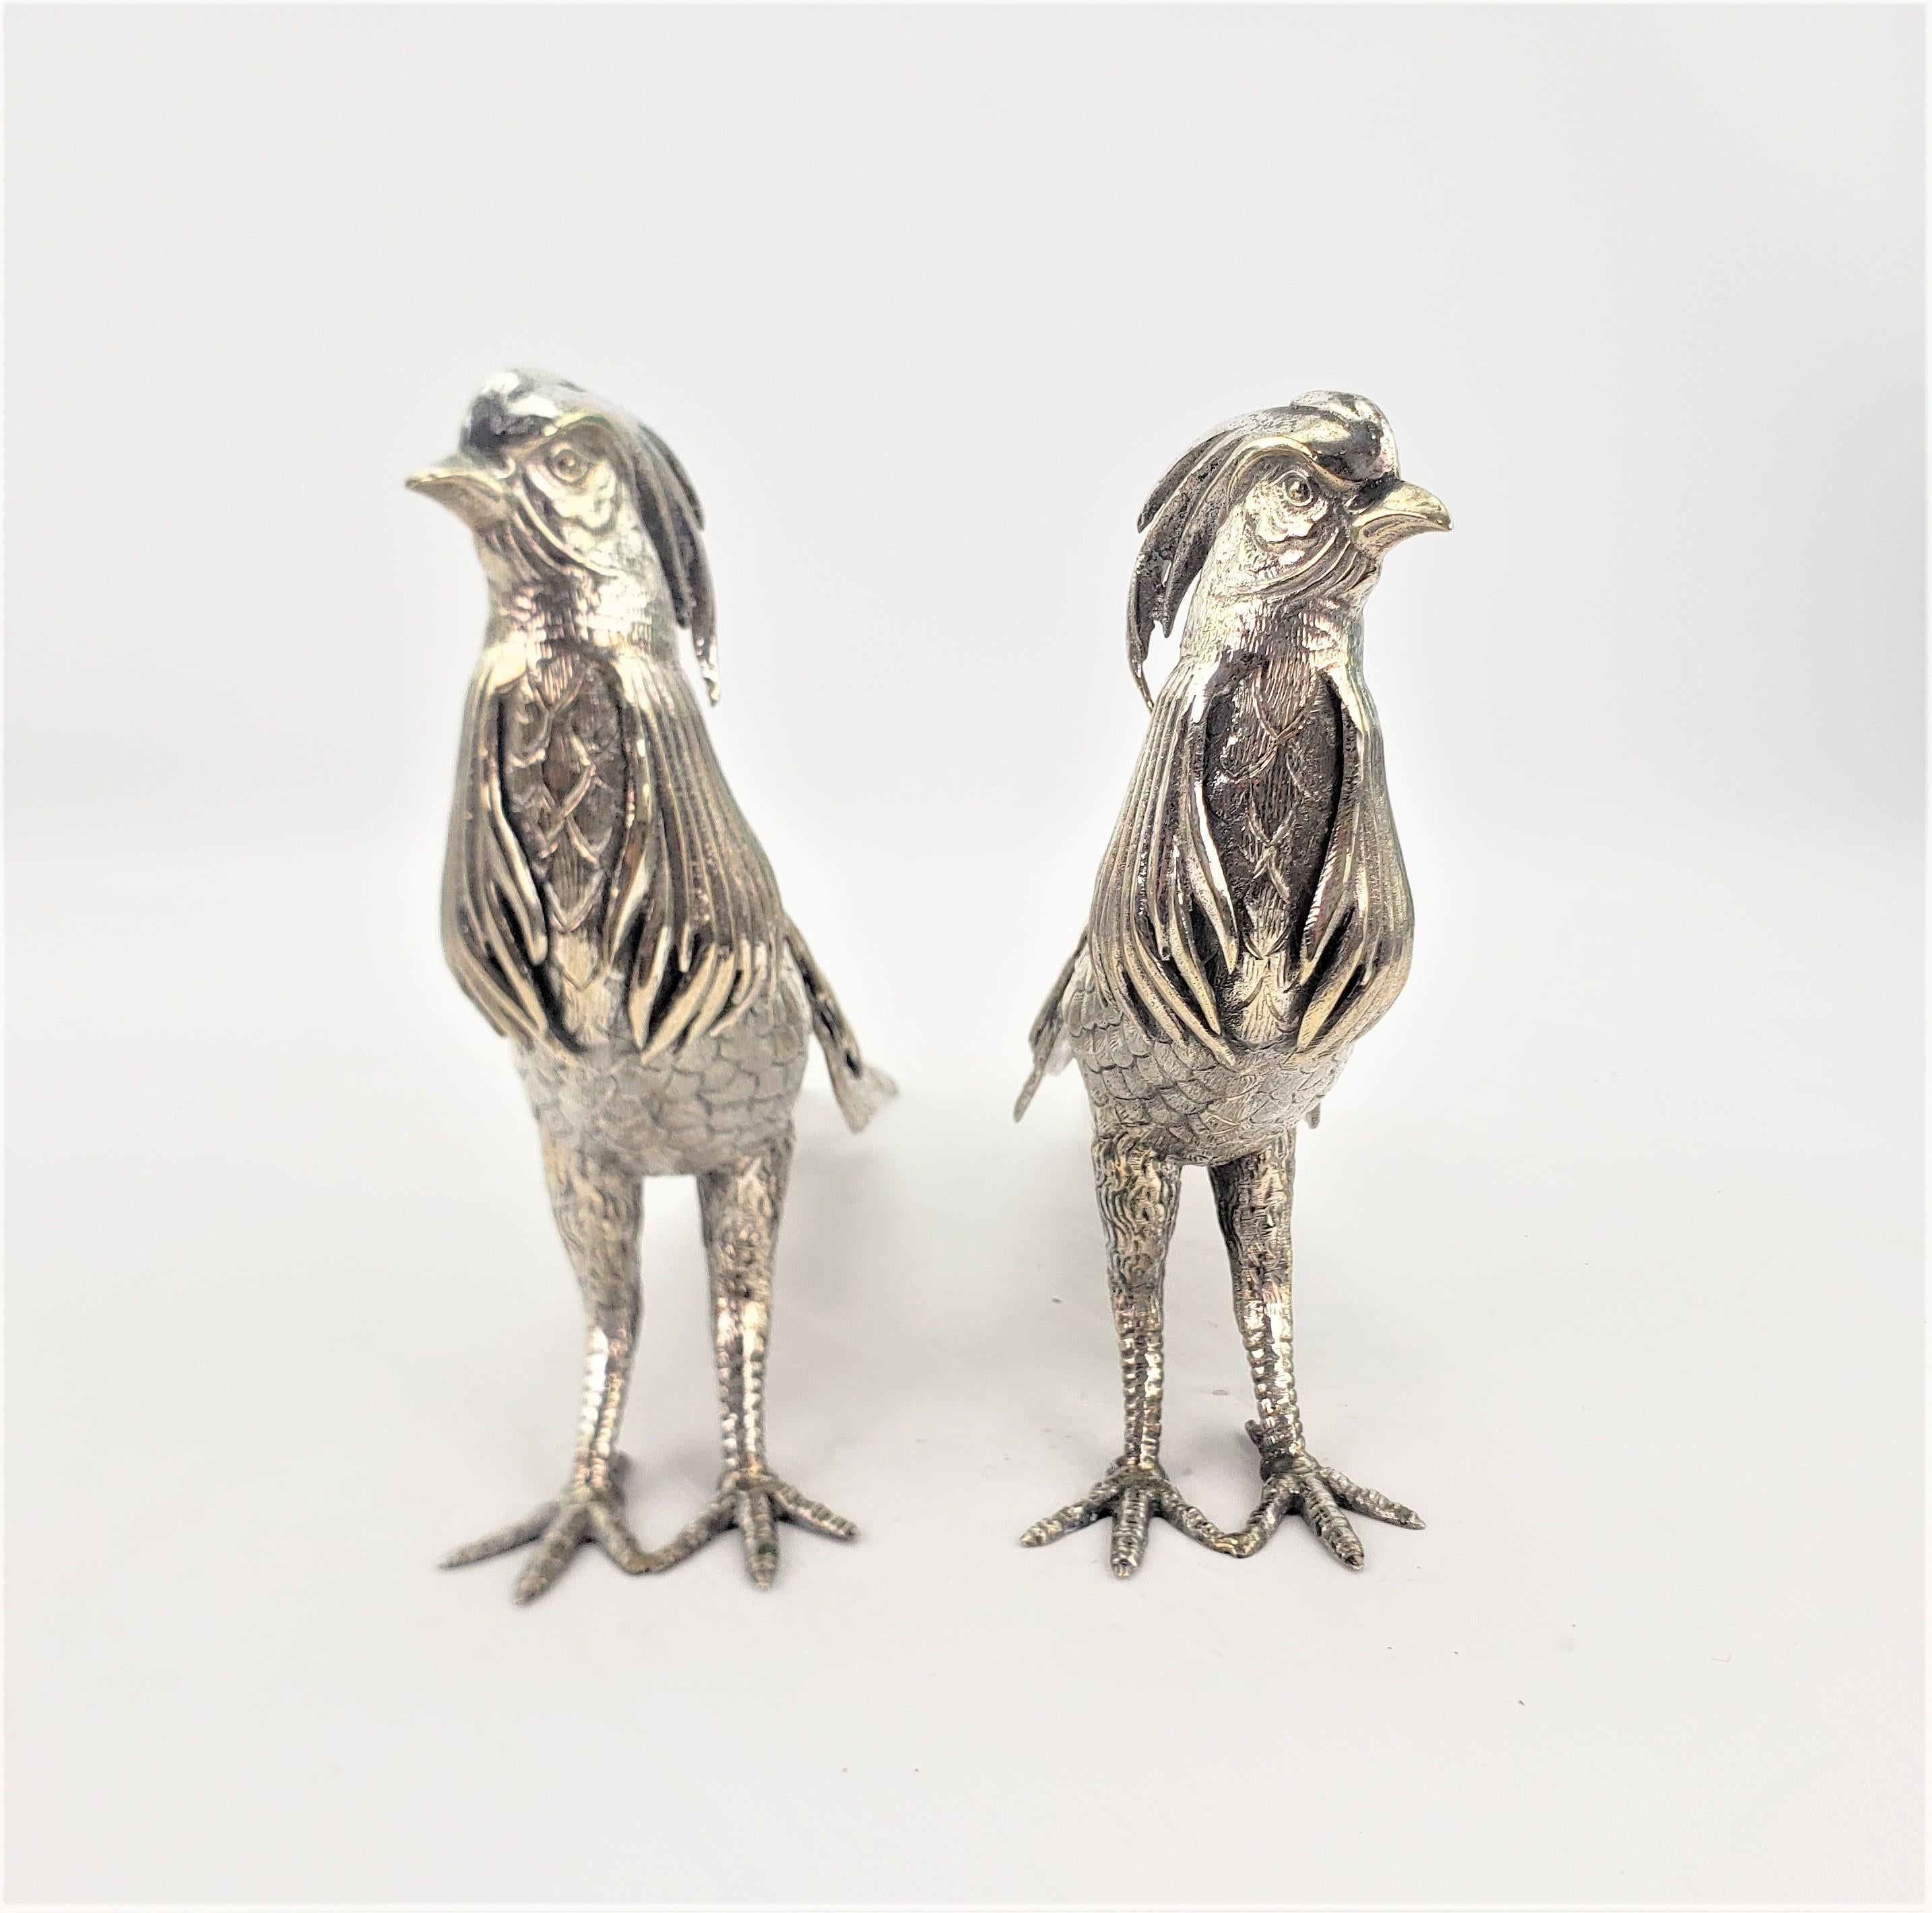 This pair of antique silver plated exotic bird or pheasant sculptures are unsigned, but presumed to have originated from Italy in approximately 1880 in the Victorian style. These ornately cast and silver plated birds are very detailed from all sides